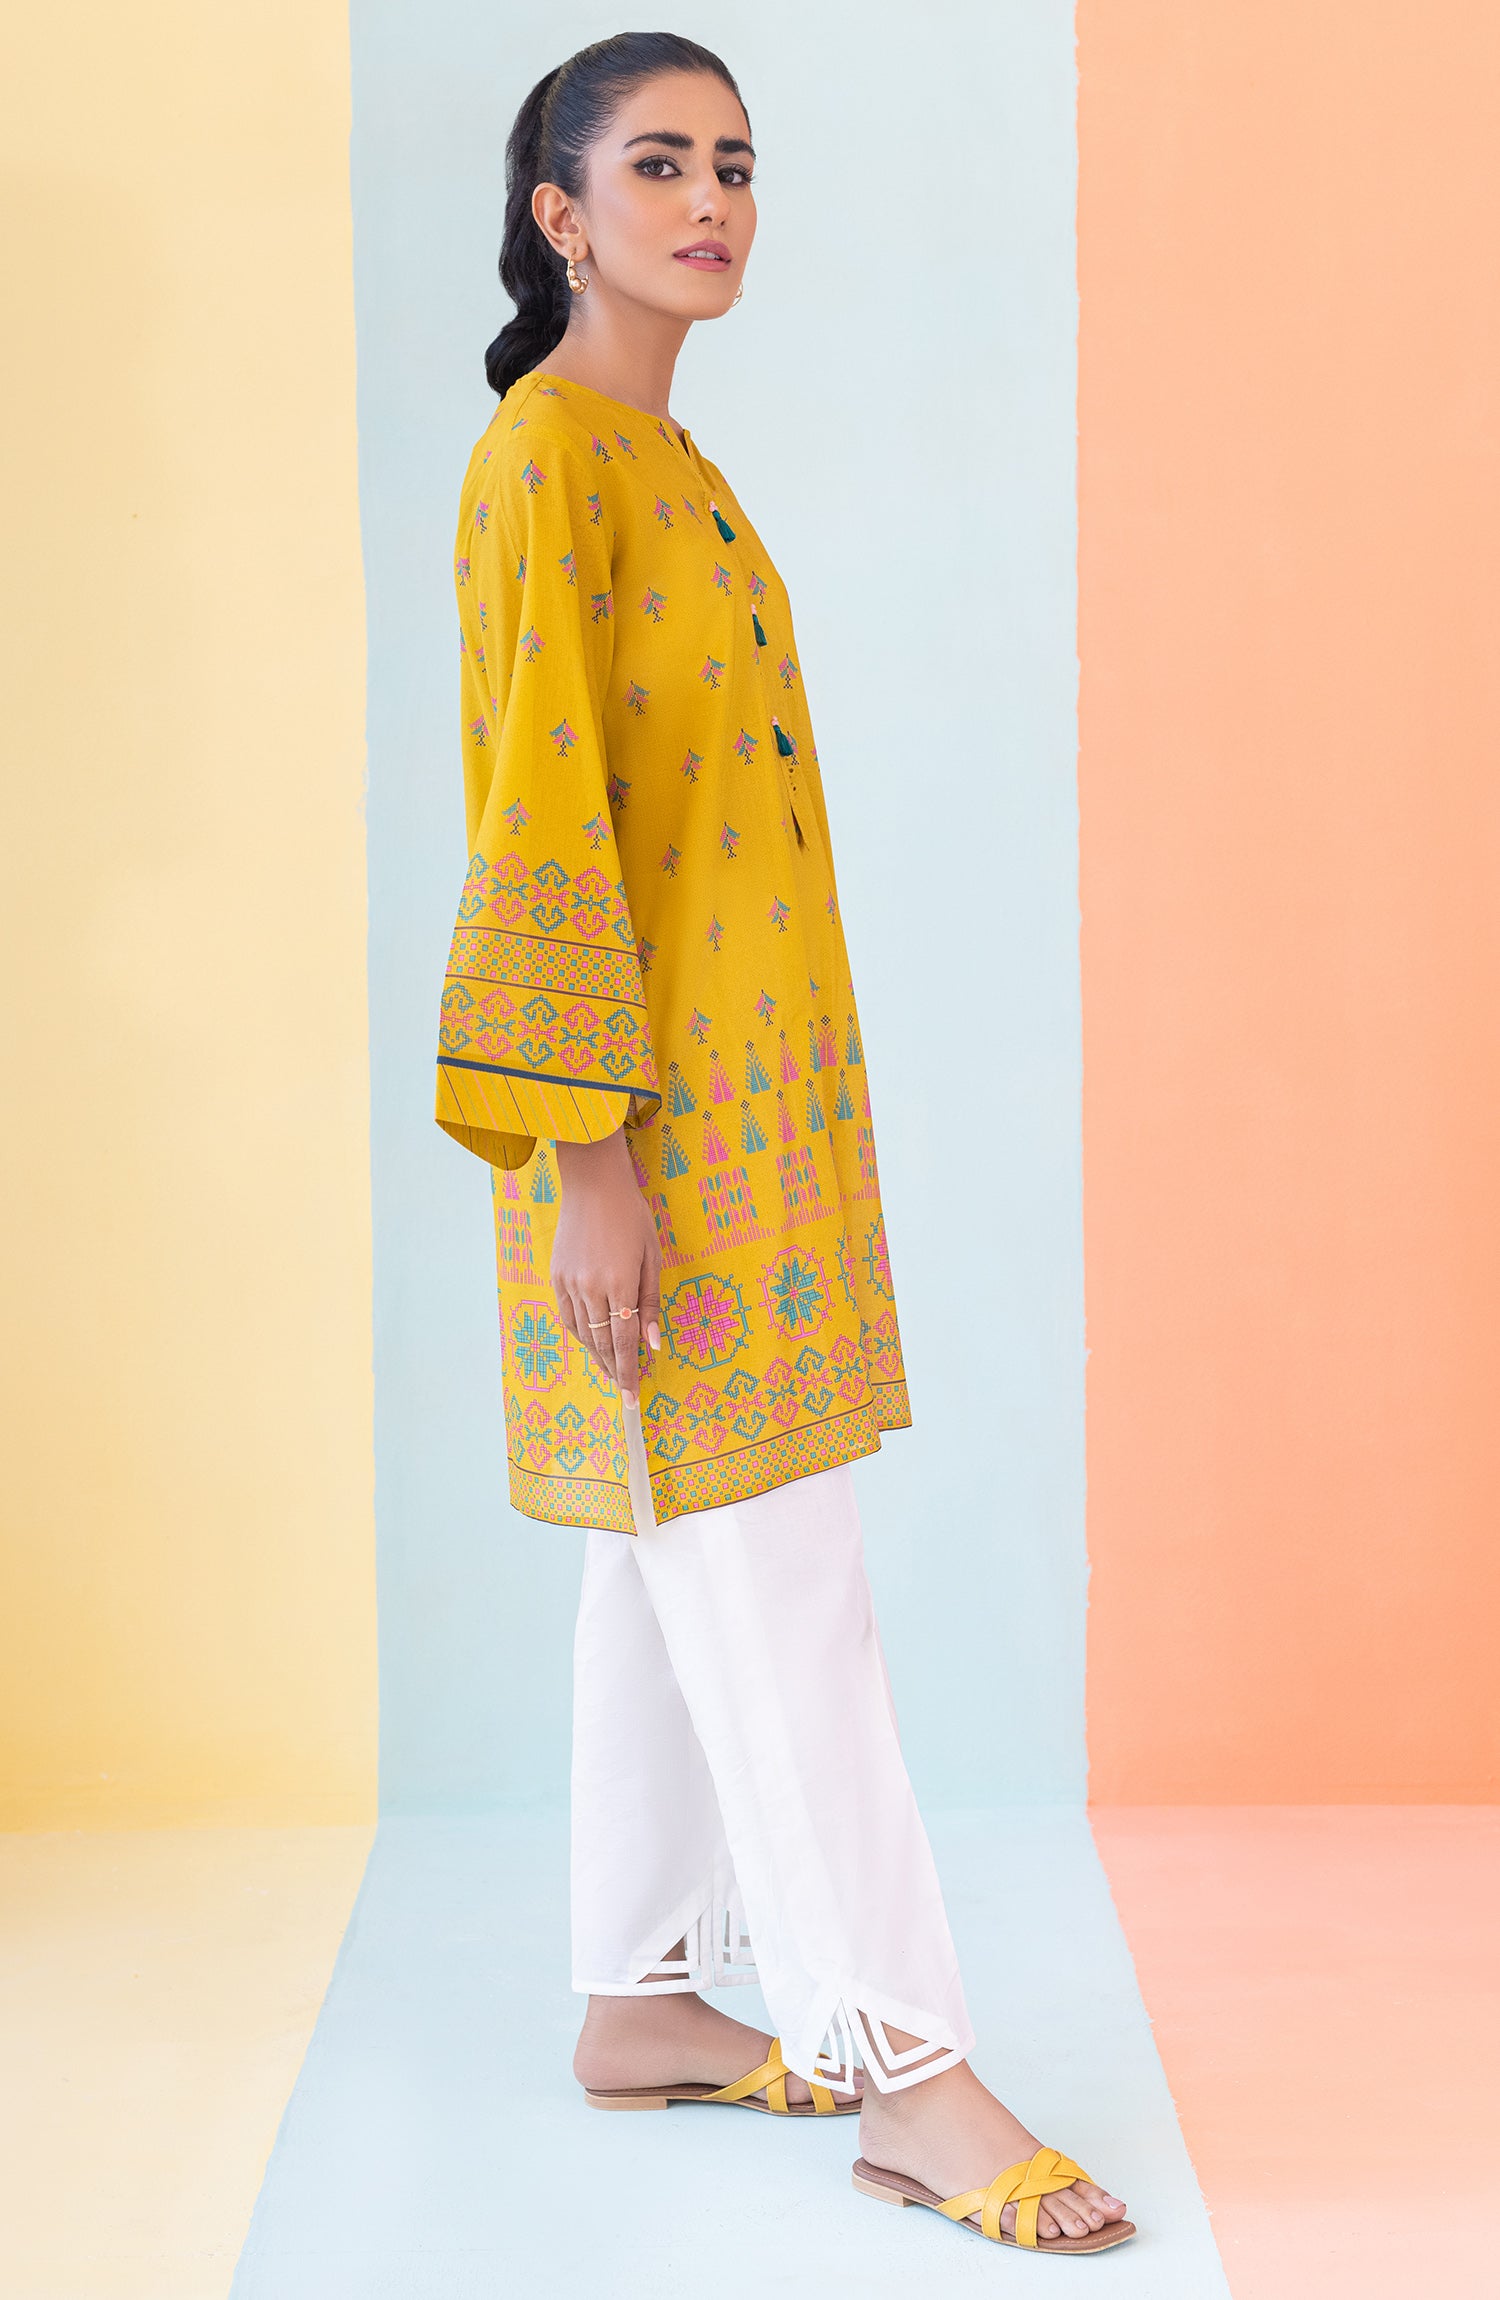 HCS-S-22-085 YELLOW LAWN SCSHIRT READY TO WEAR SHIRT